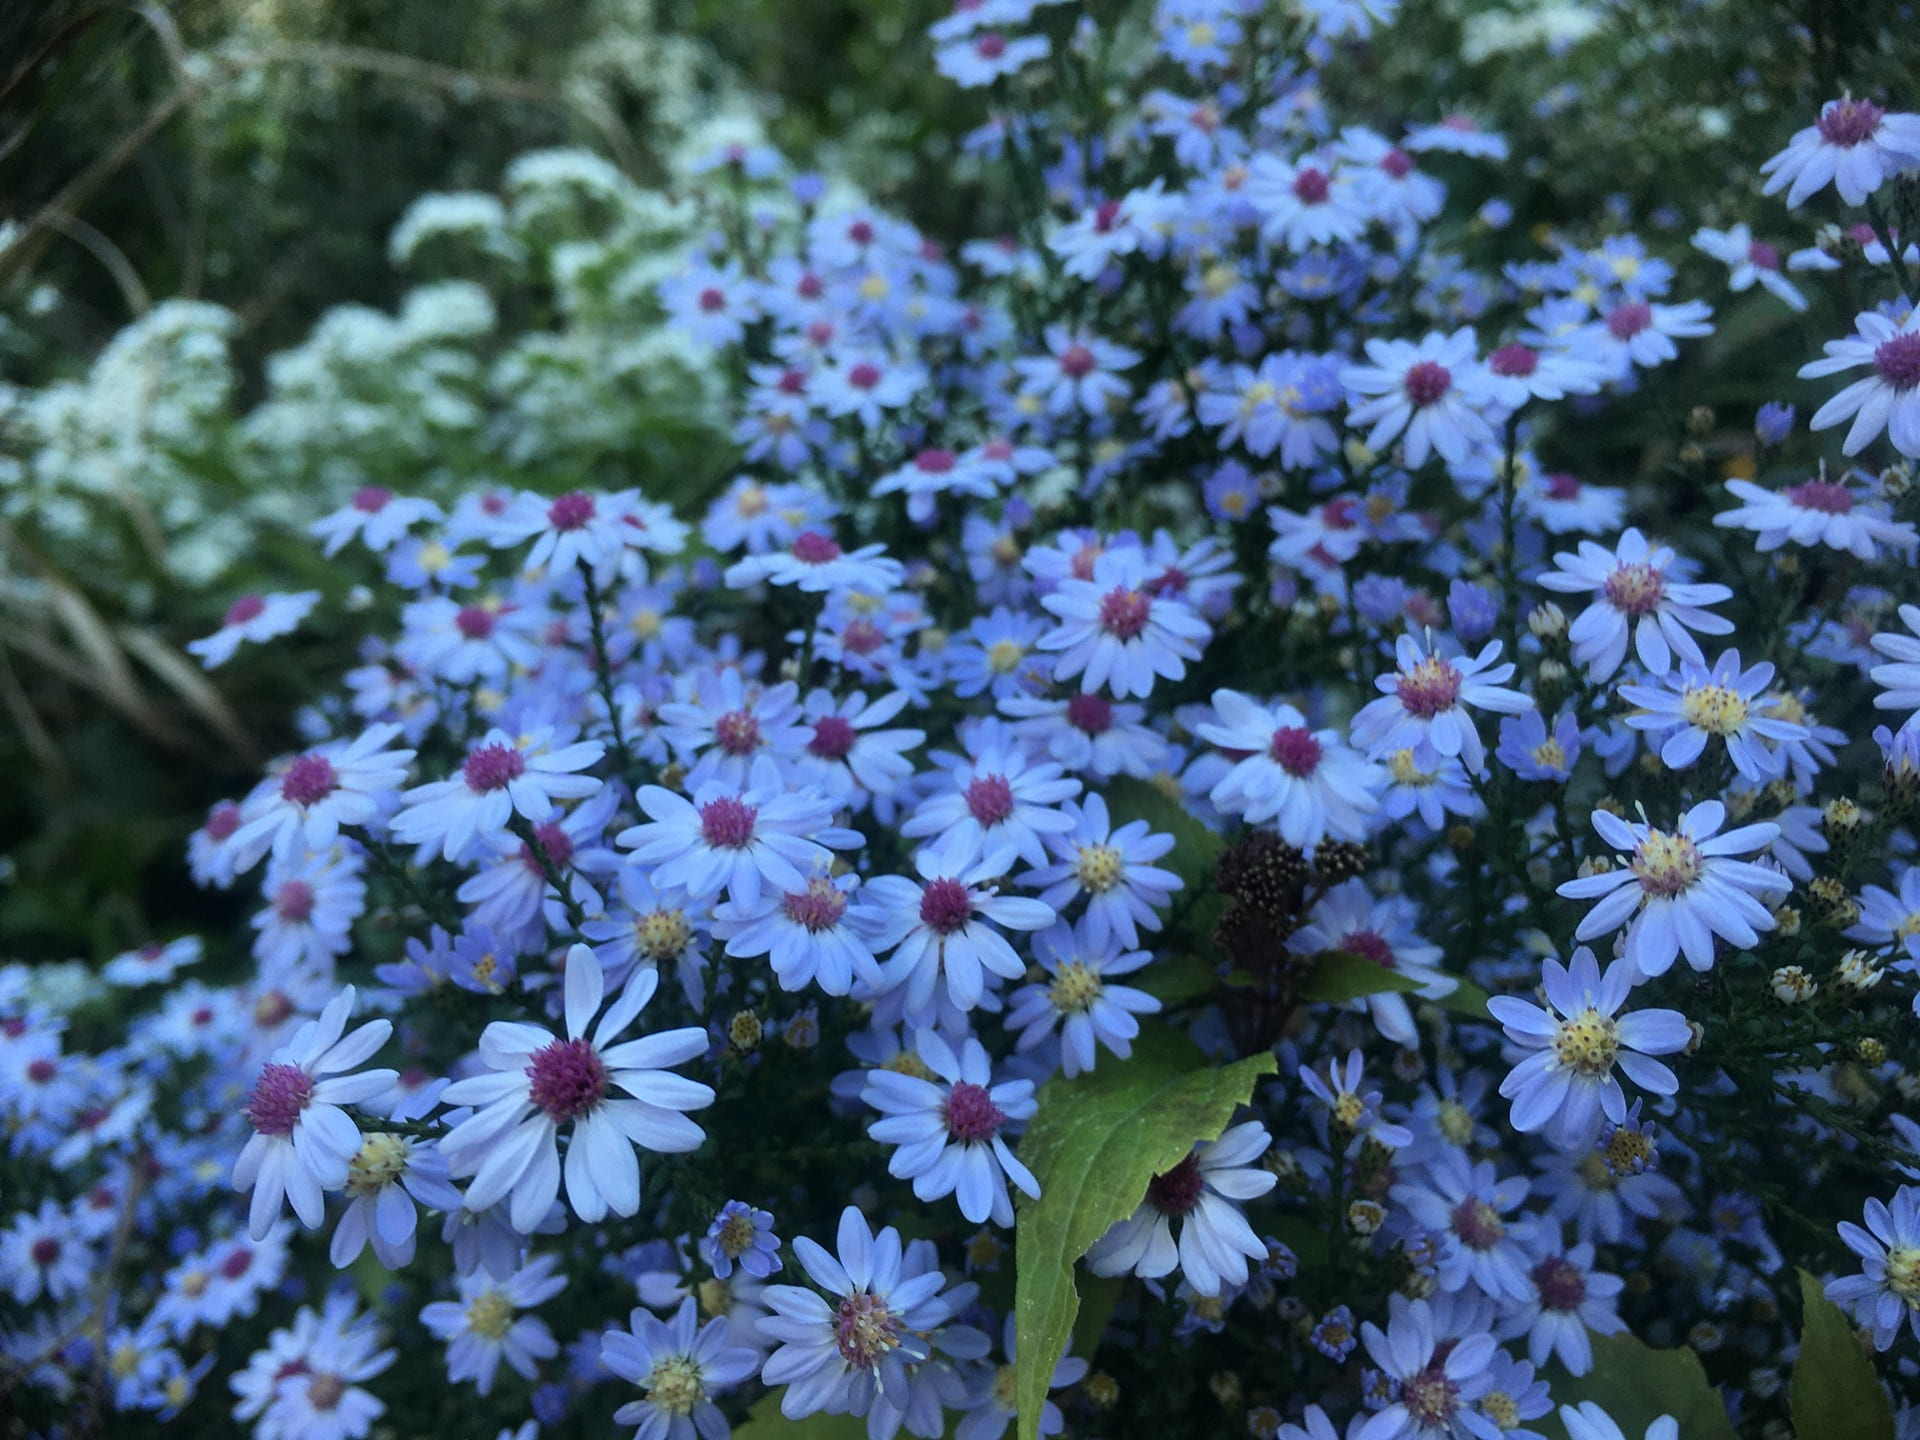 A profusion of Symphyotrichum cordifolium blooms add to the floral tapestry of fall.